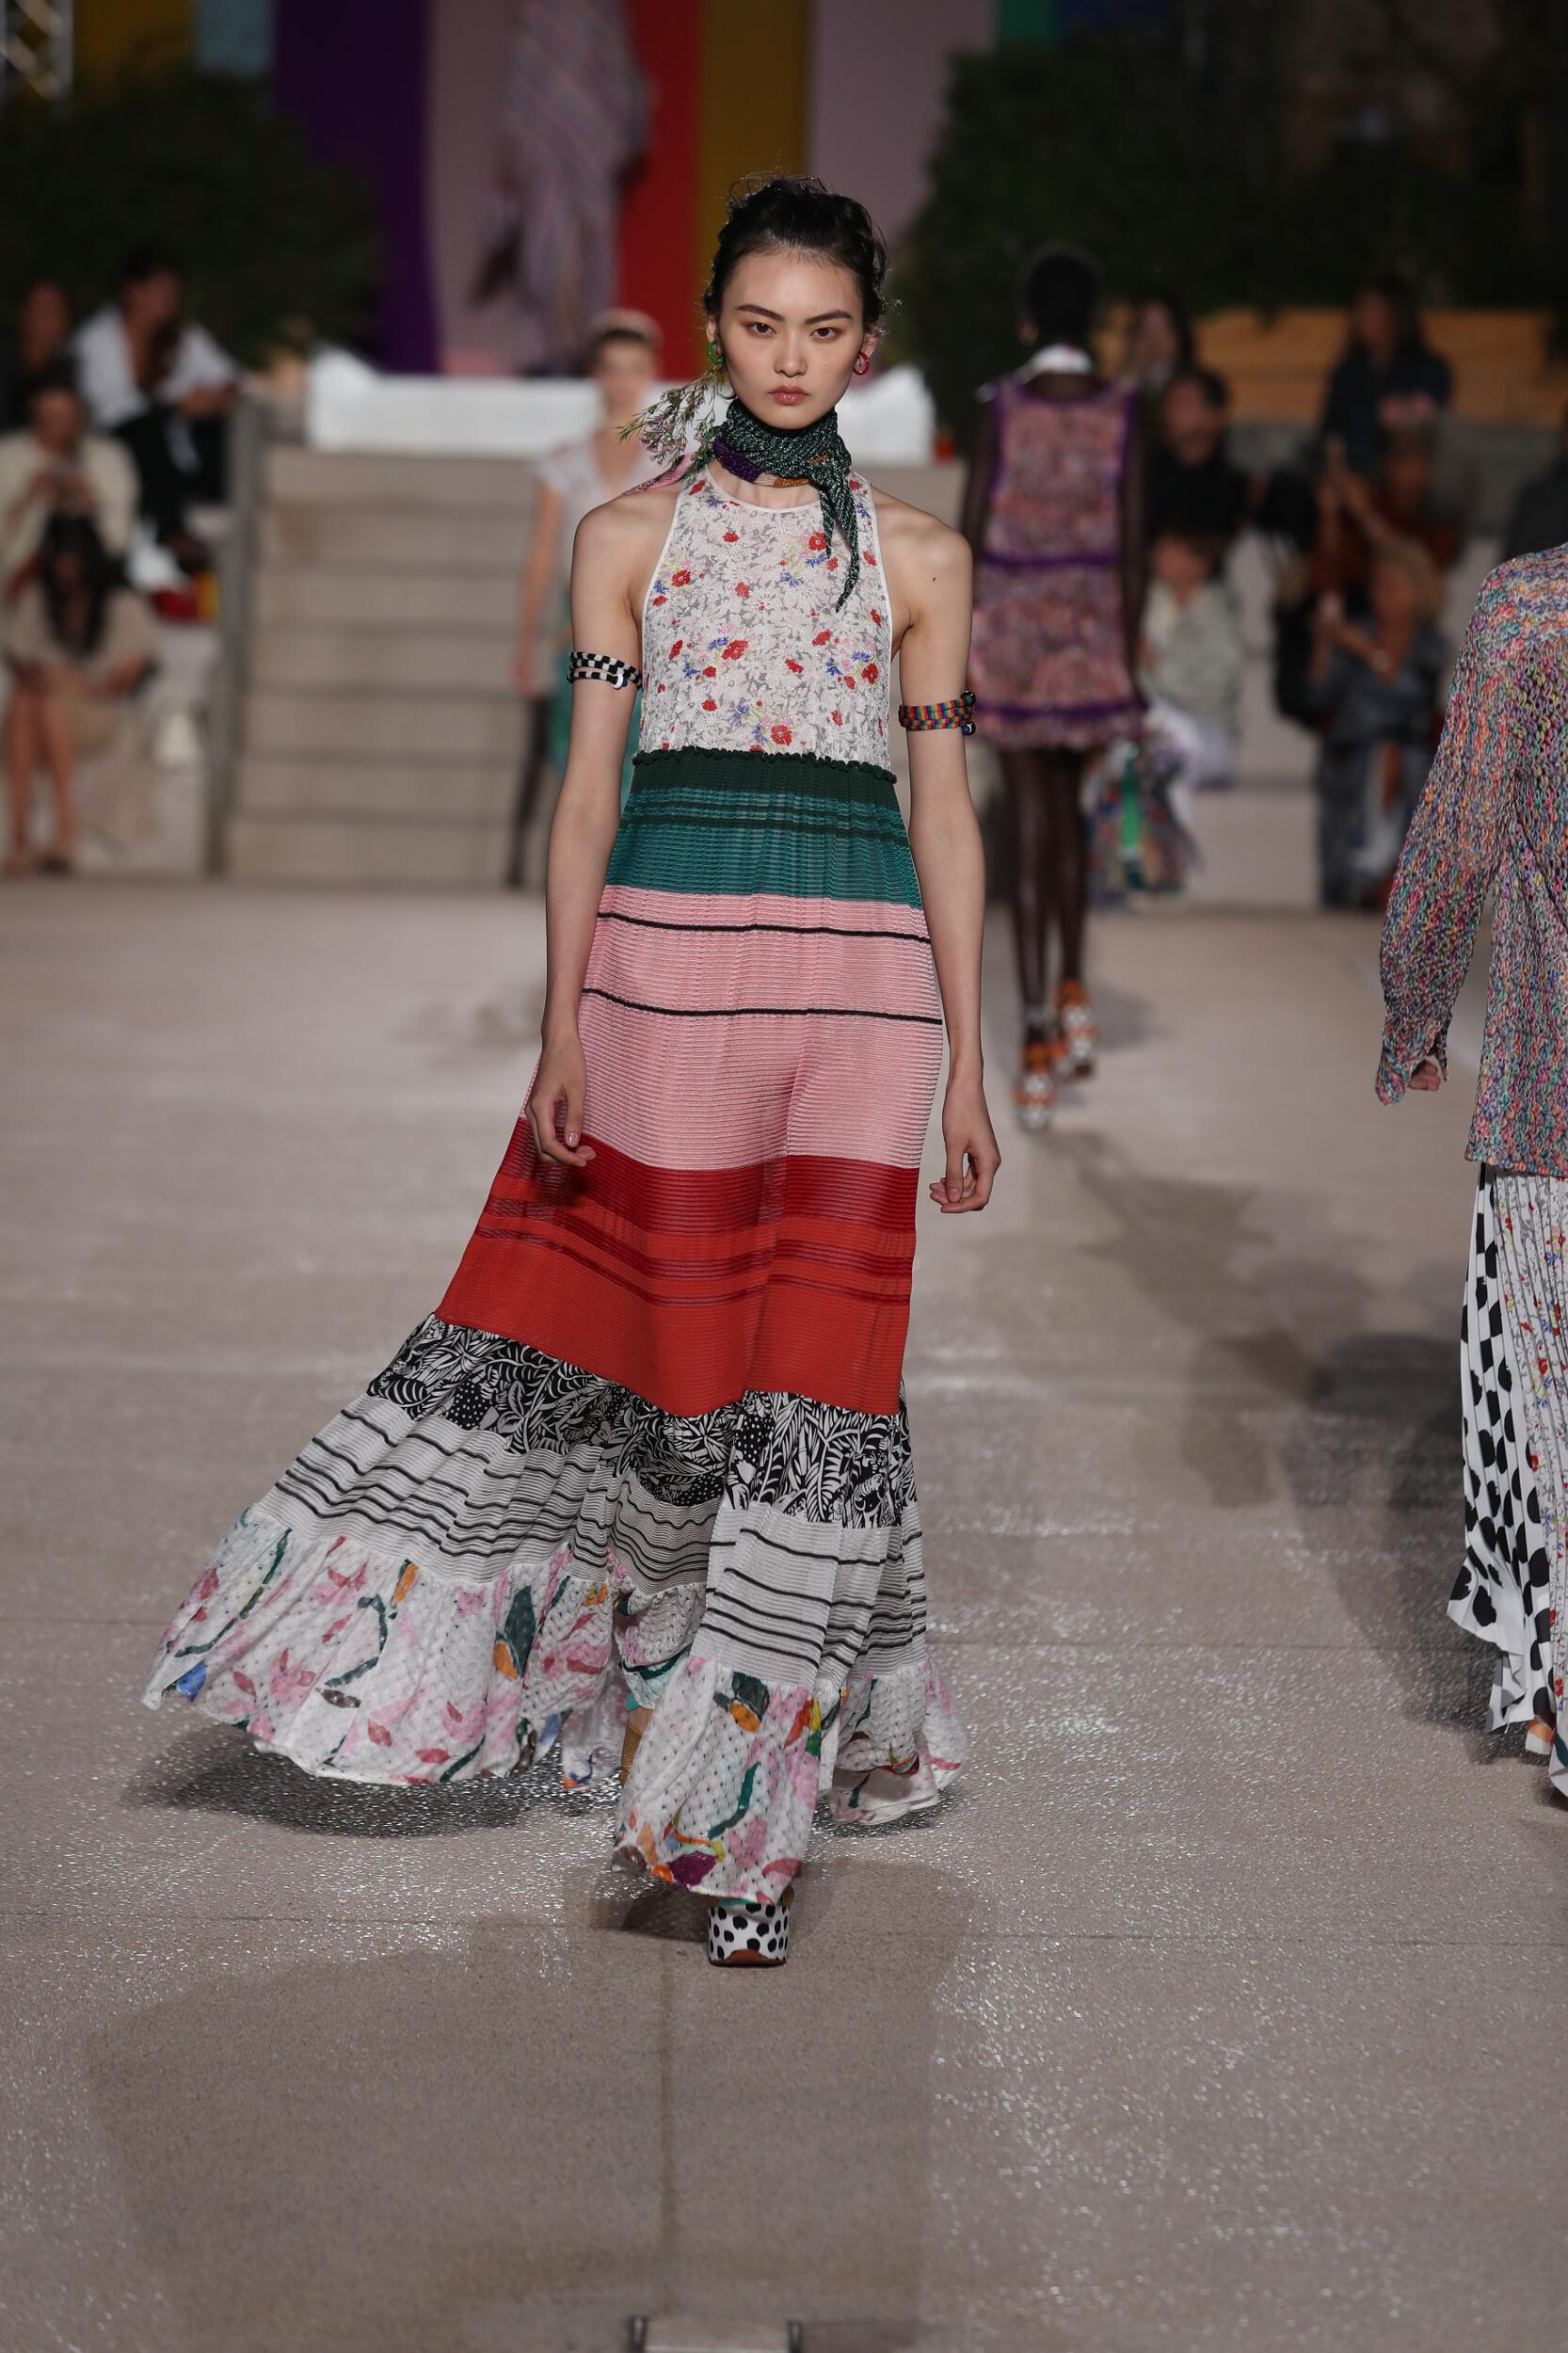 MISSONI SPRING SUMMER 2020 COLLECTION | The Skinny Beep